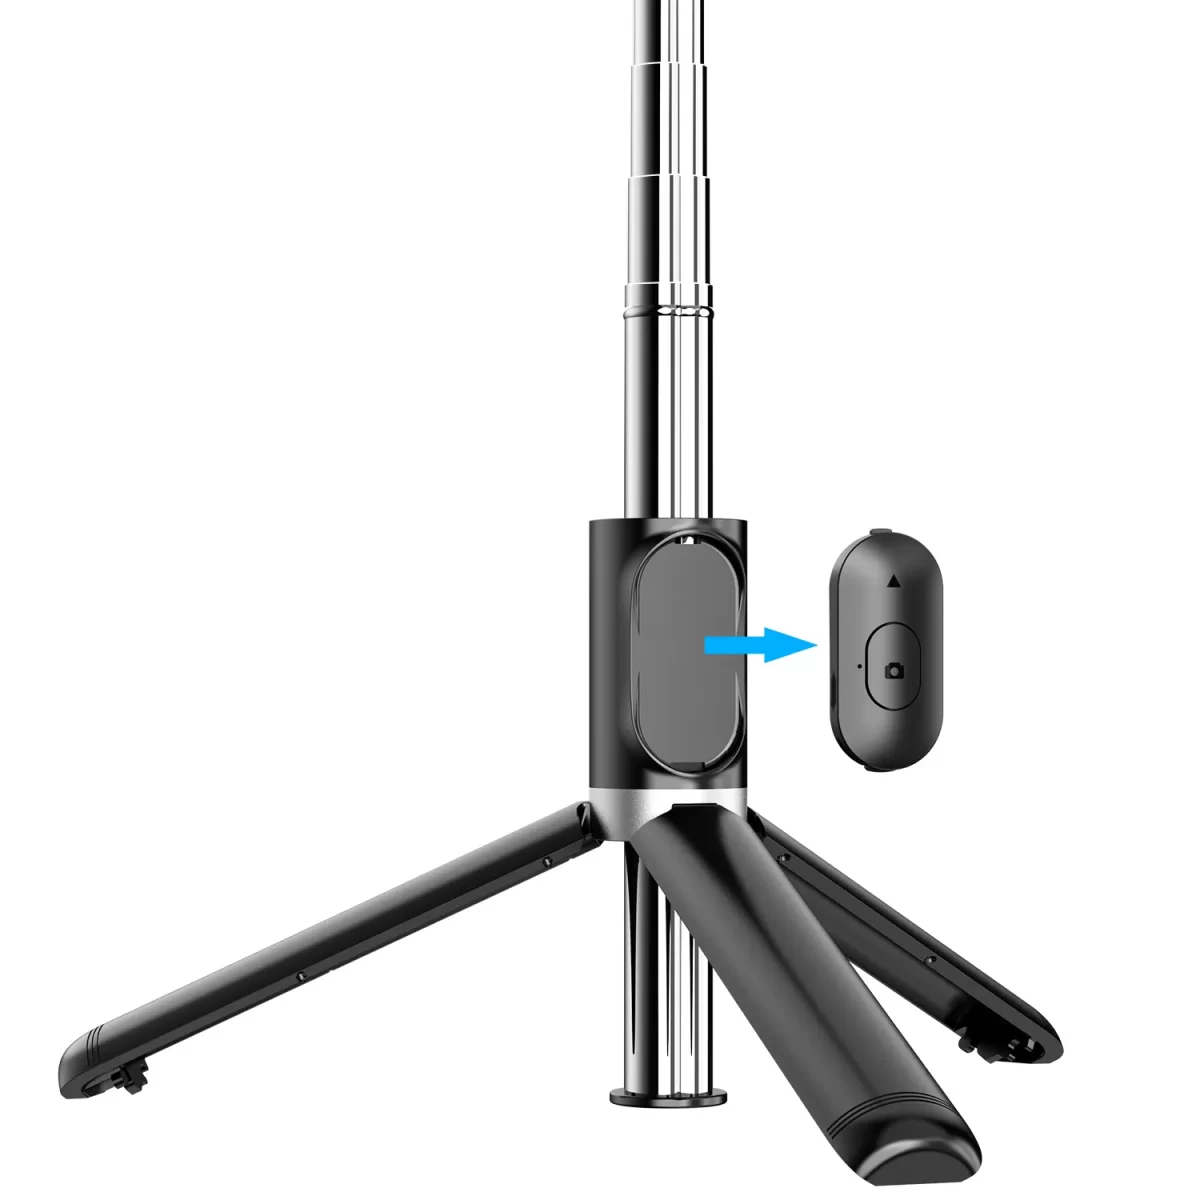 Portable 41 Inch Selfie Stick Phone Tripod with Wireless Remote Extendable Tripod Stand 360 Rotation Compatible 2 Portable 41 Inch Selfie Stick Tripod with Wireless Remote Extendable 360 Rotation